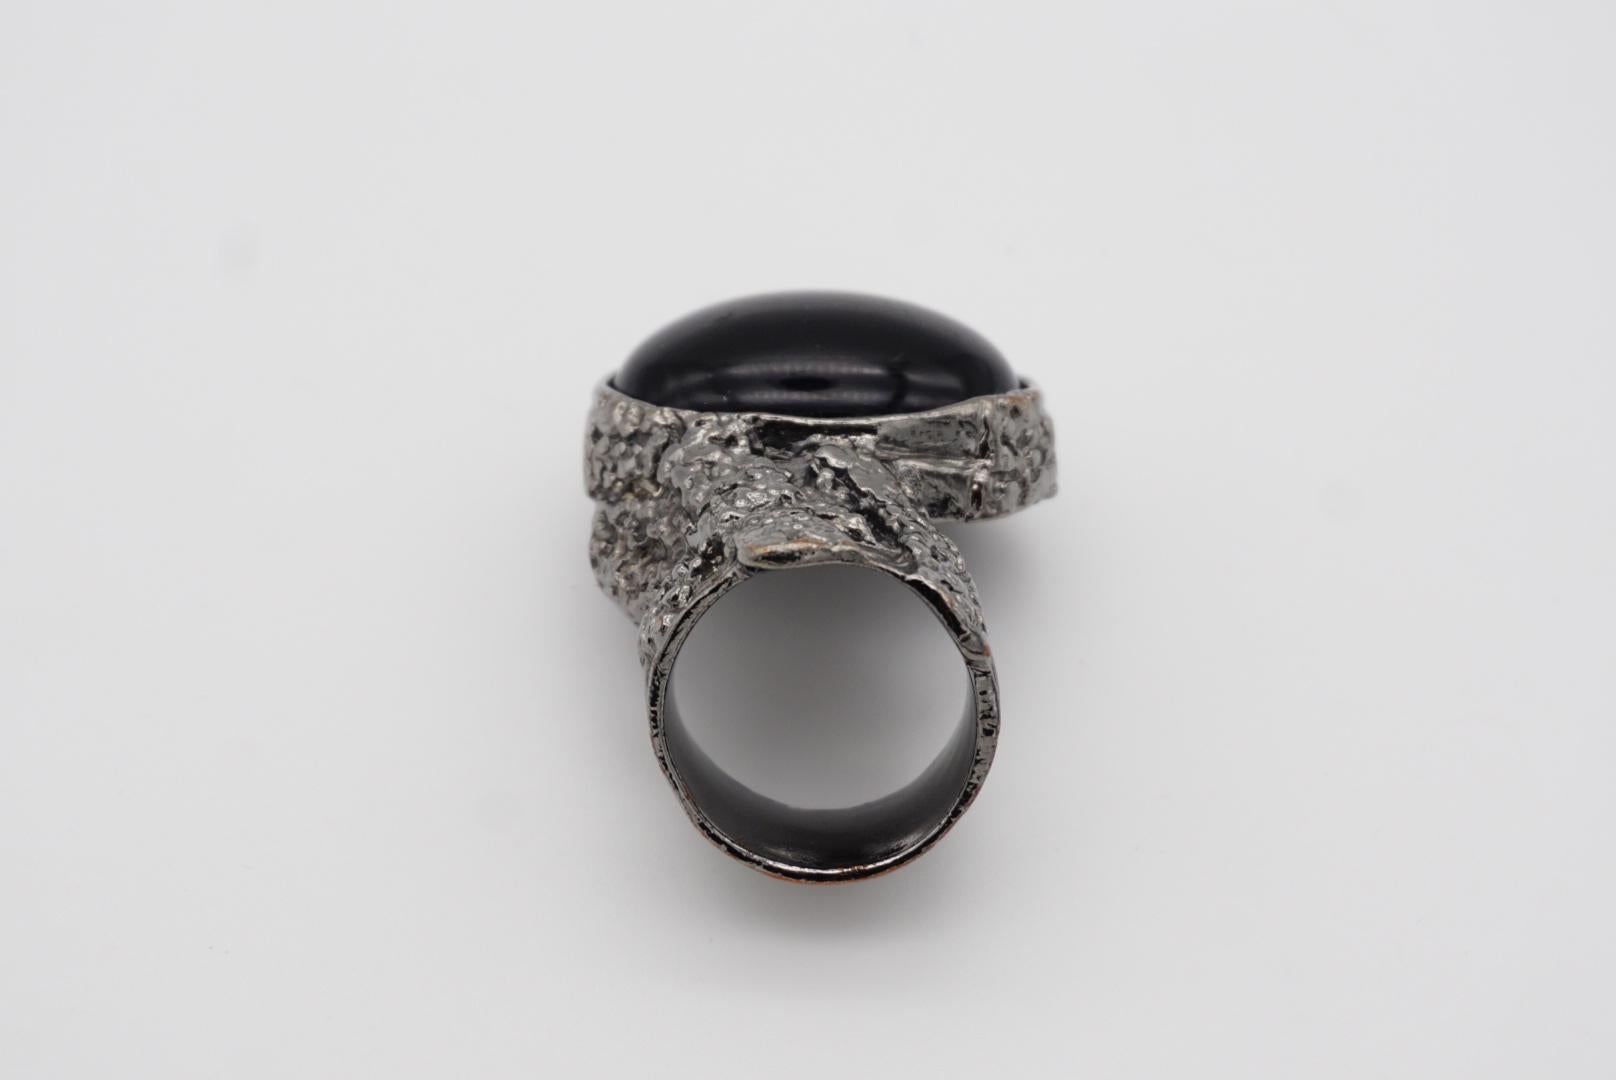 Yves Saint Laurent YSL Arty Black Enamel Statement Cocktail Silver Ring, Size 6 For Sale 2